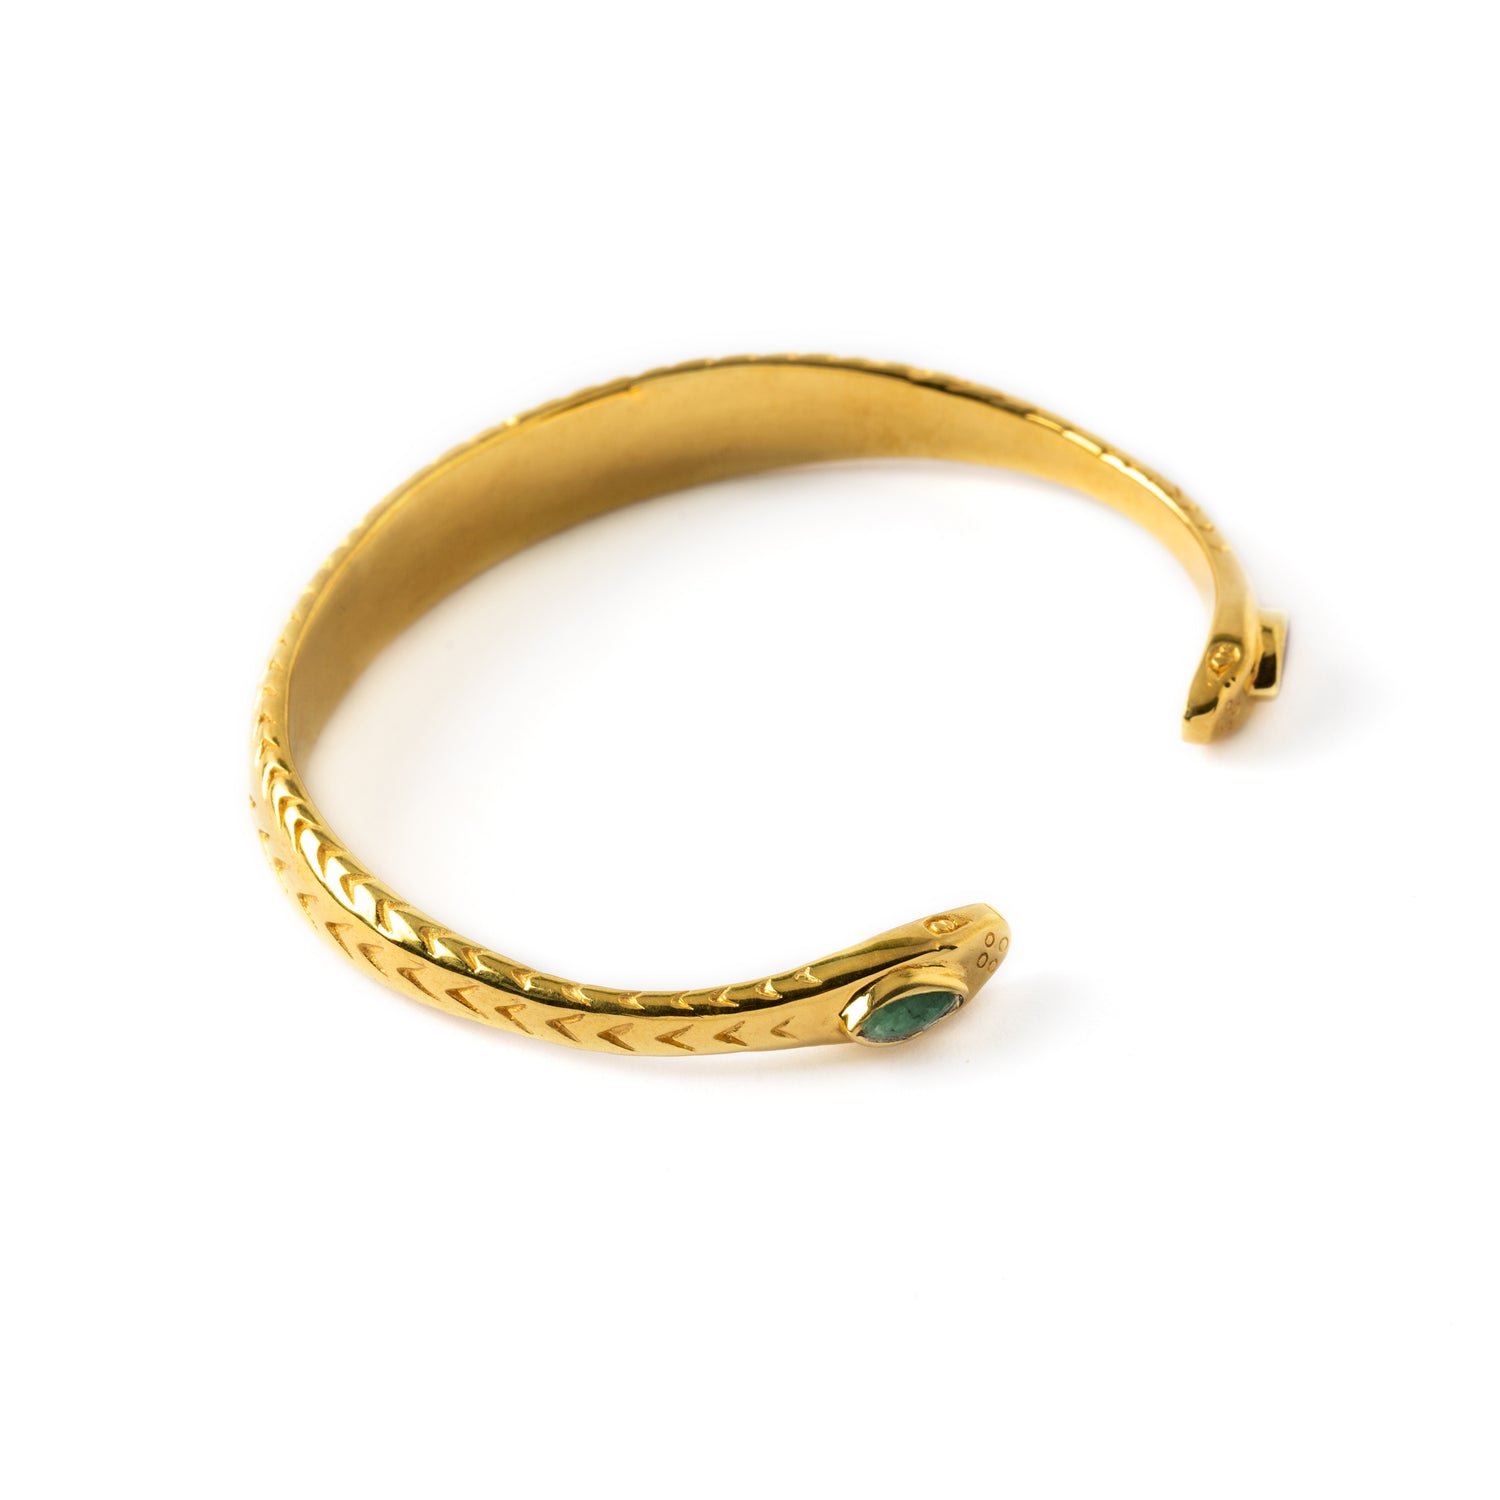 Naga Gold Cuff with Emerald right side view